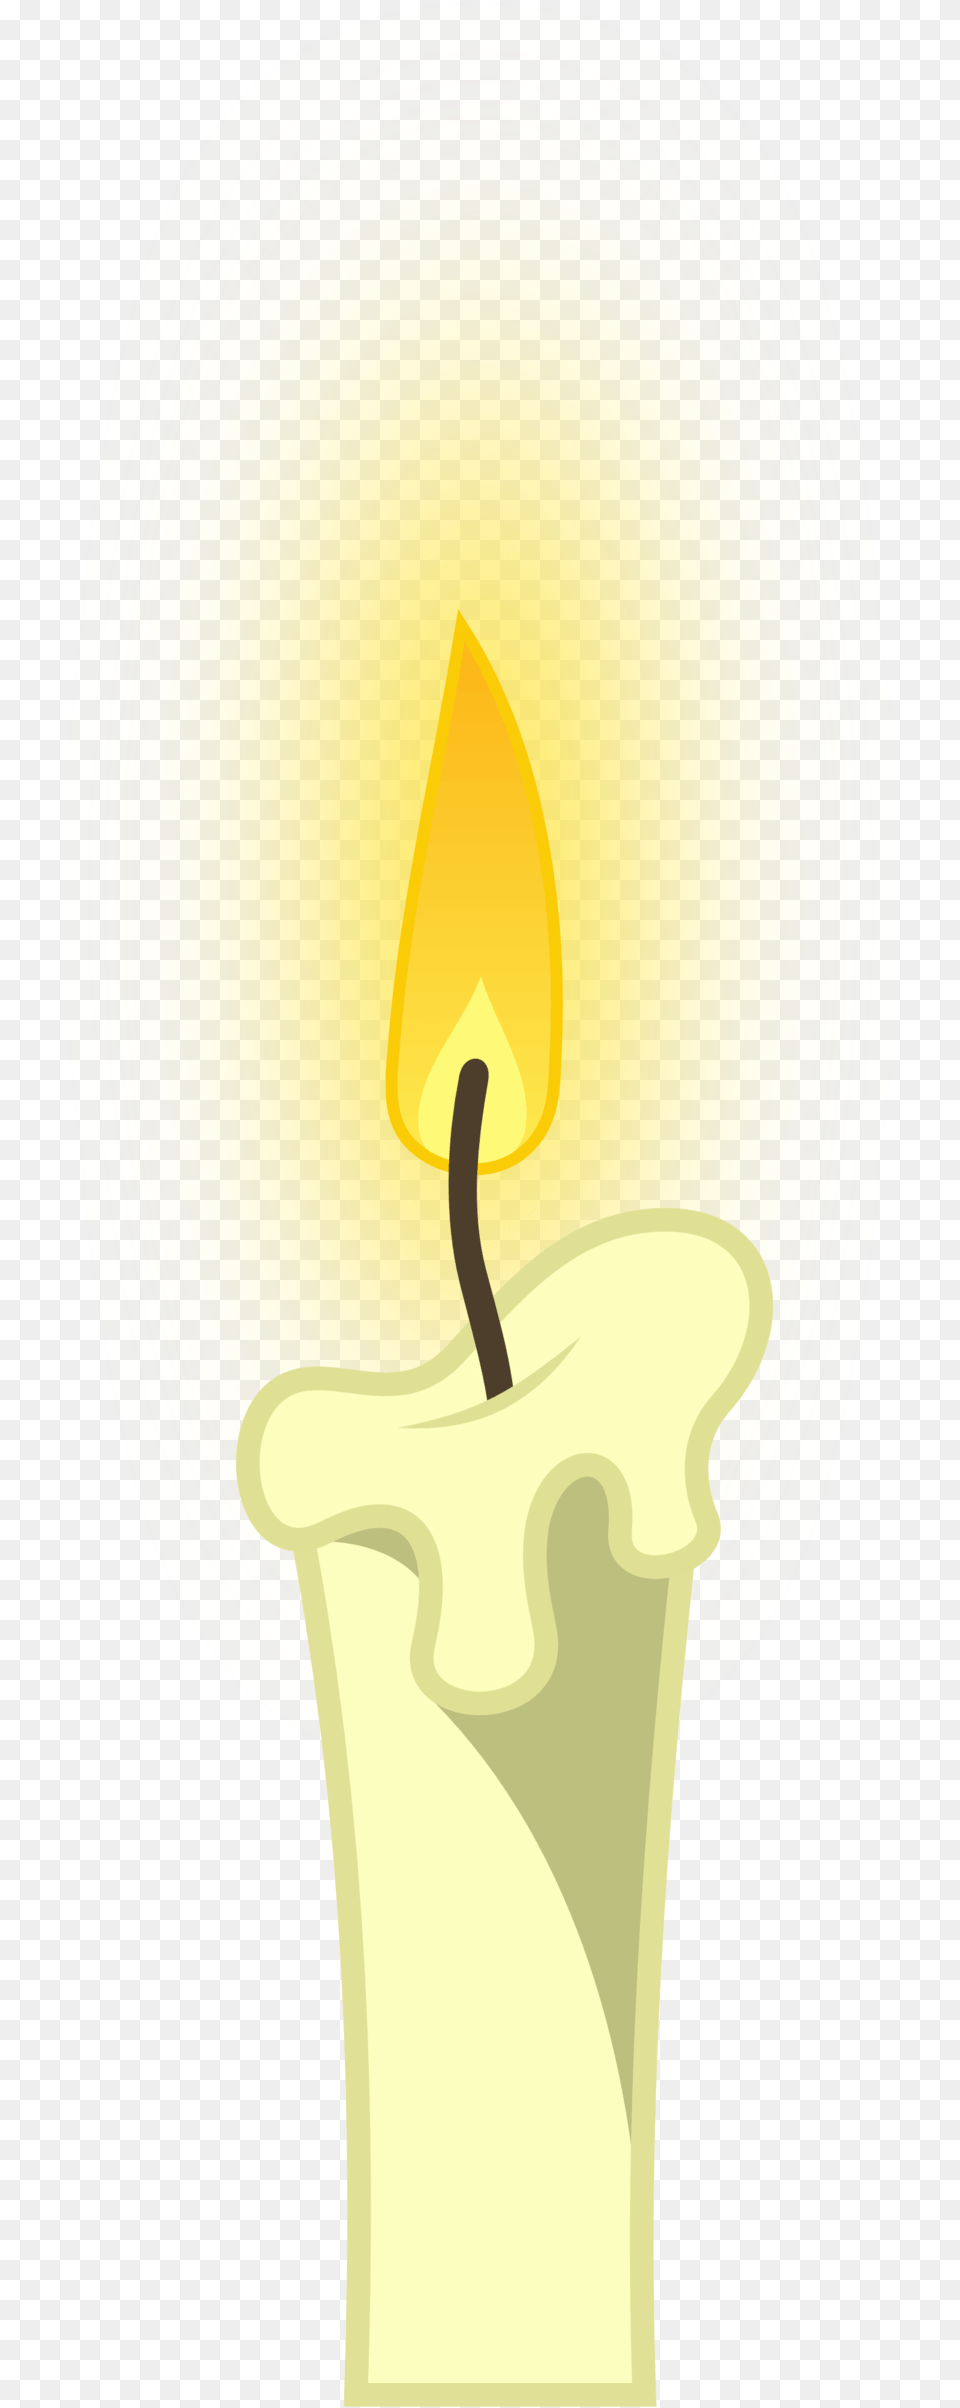 Candle Best Birthday White Candle Vector, Fire, Flame Png Image